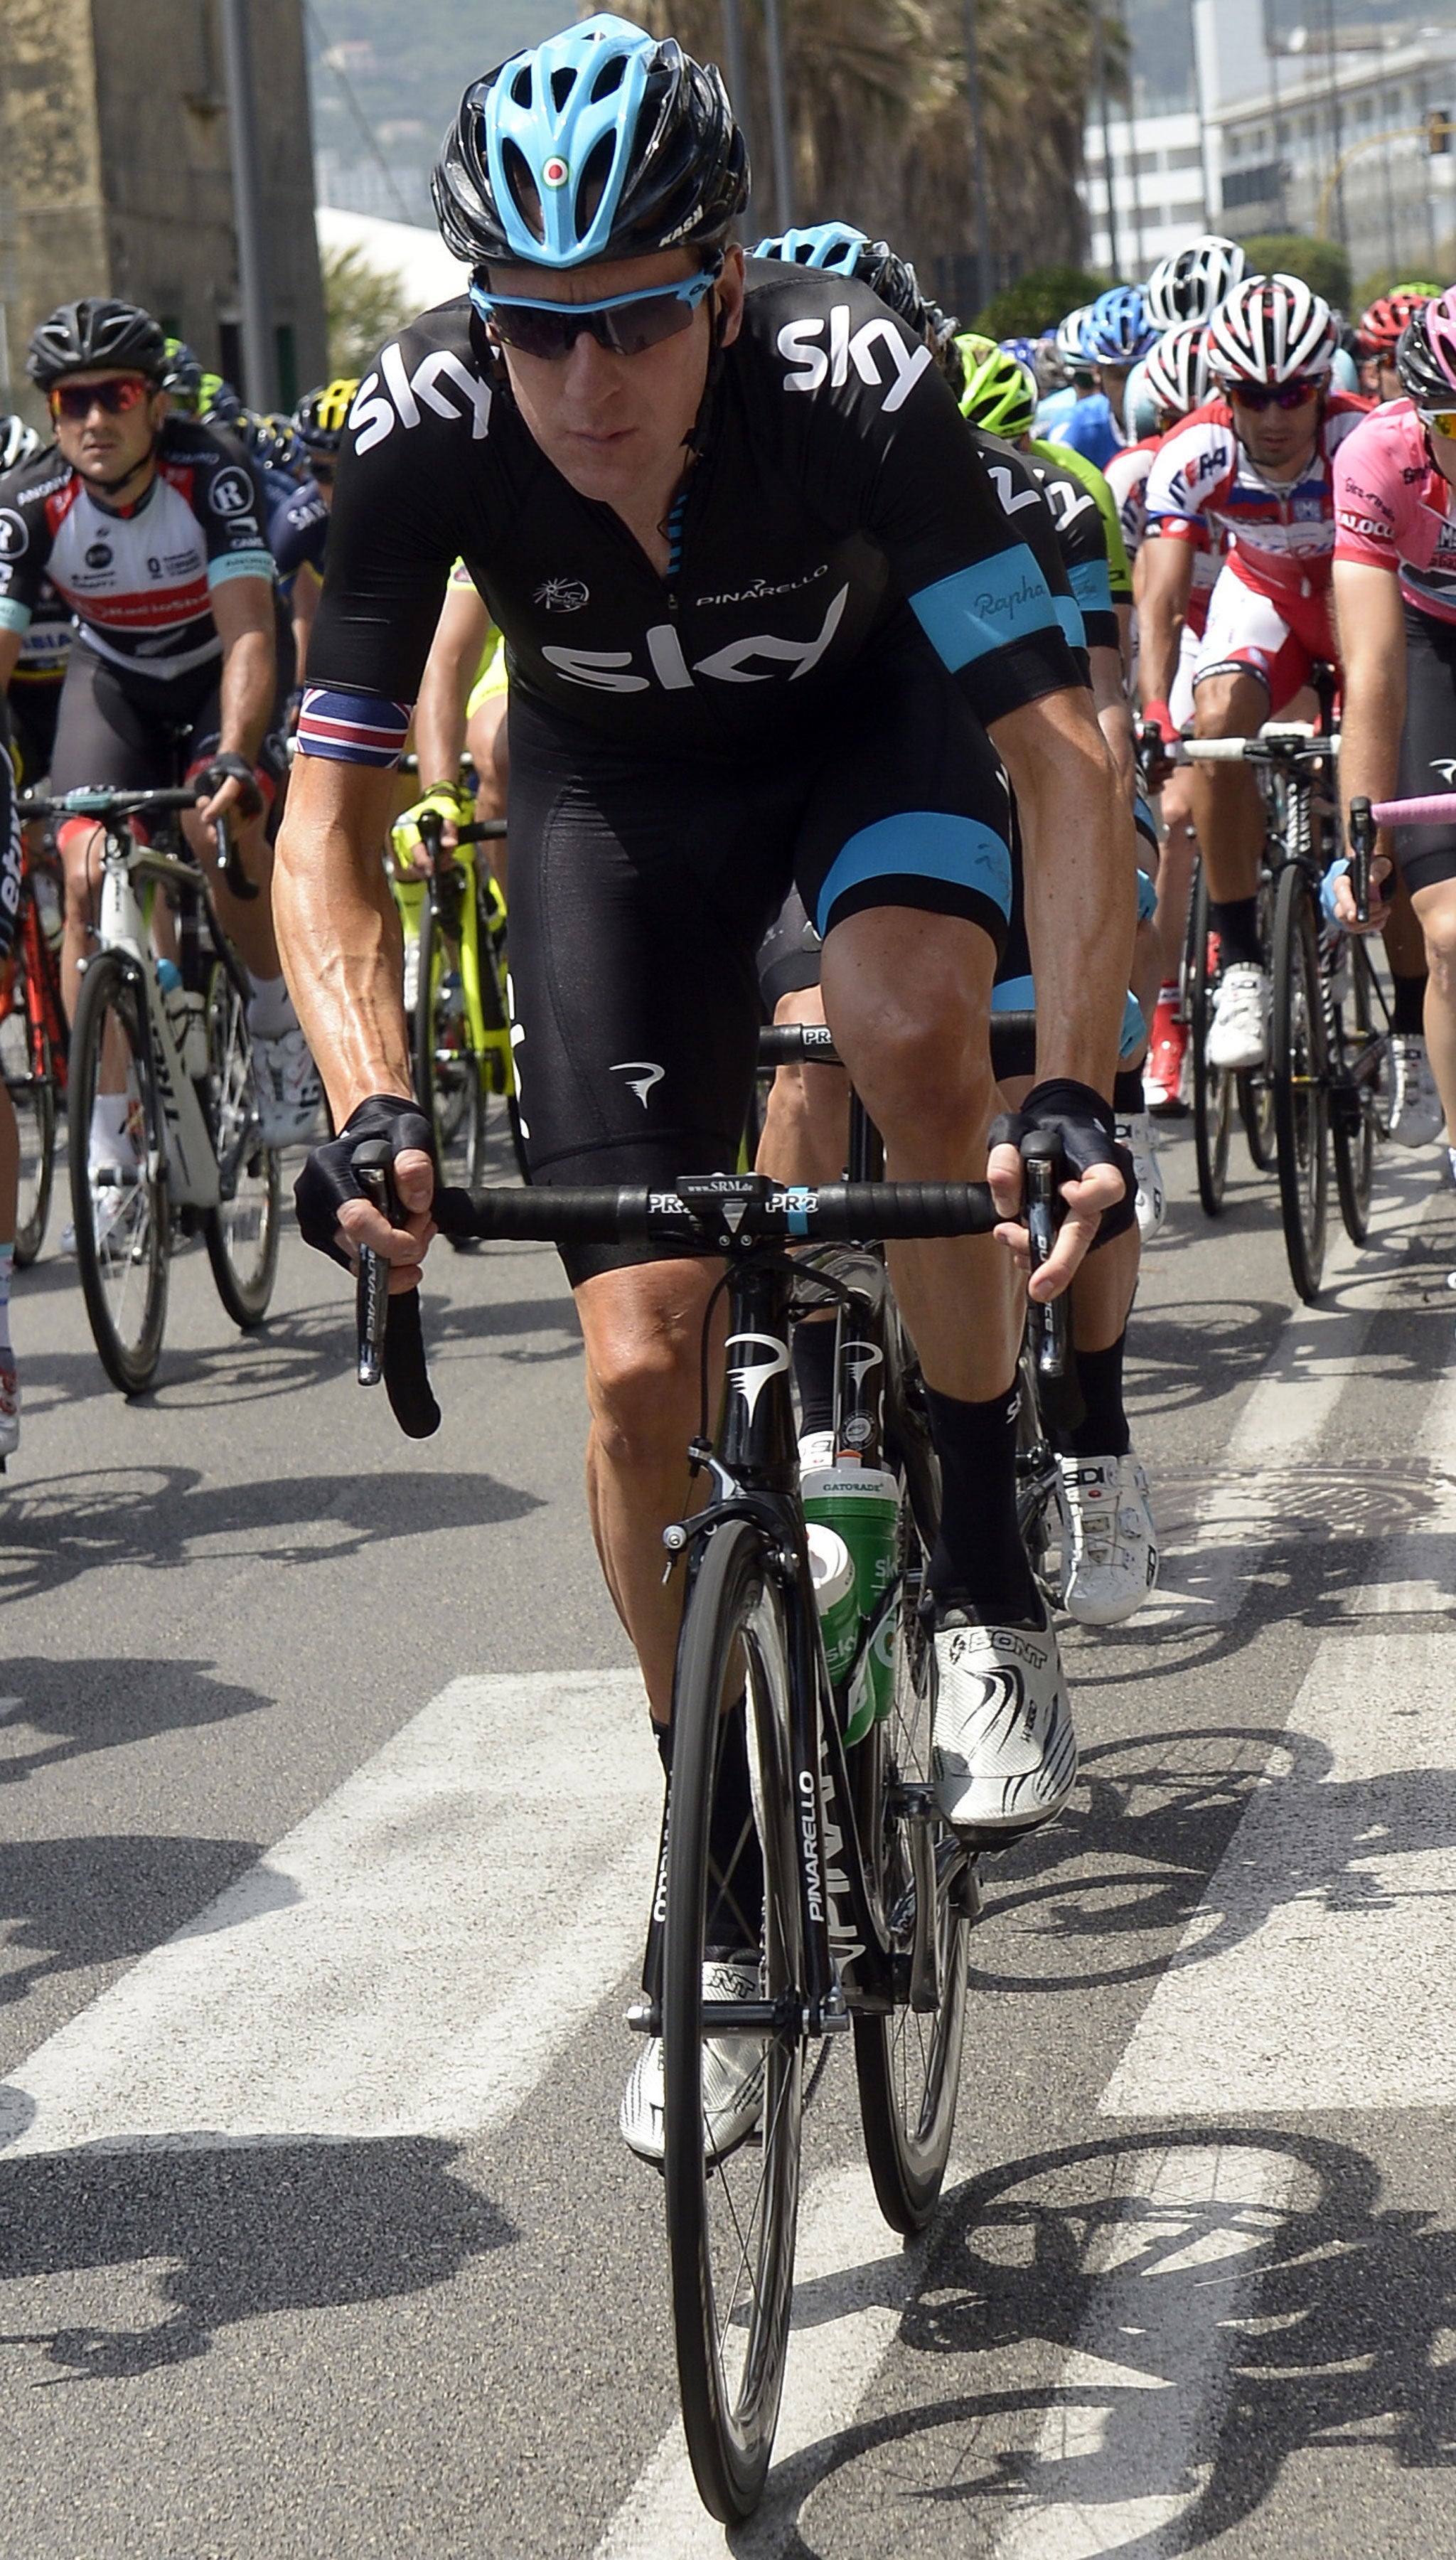 Bradley Wiggins pedals in the pack during the third stage of the Giro d’Italia from Sorrento to Marina di Ascea